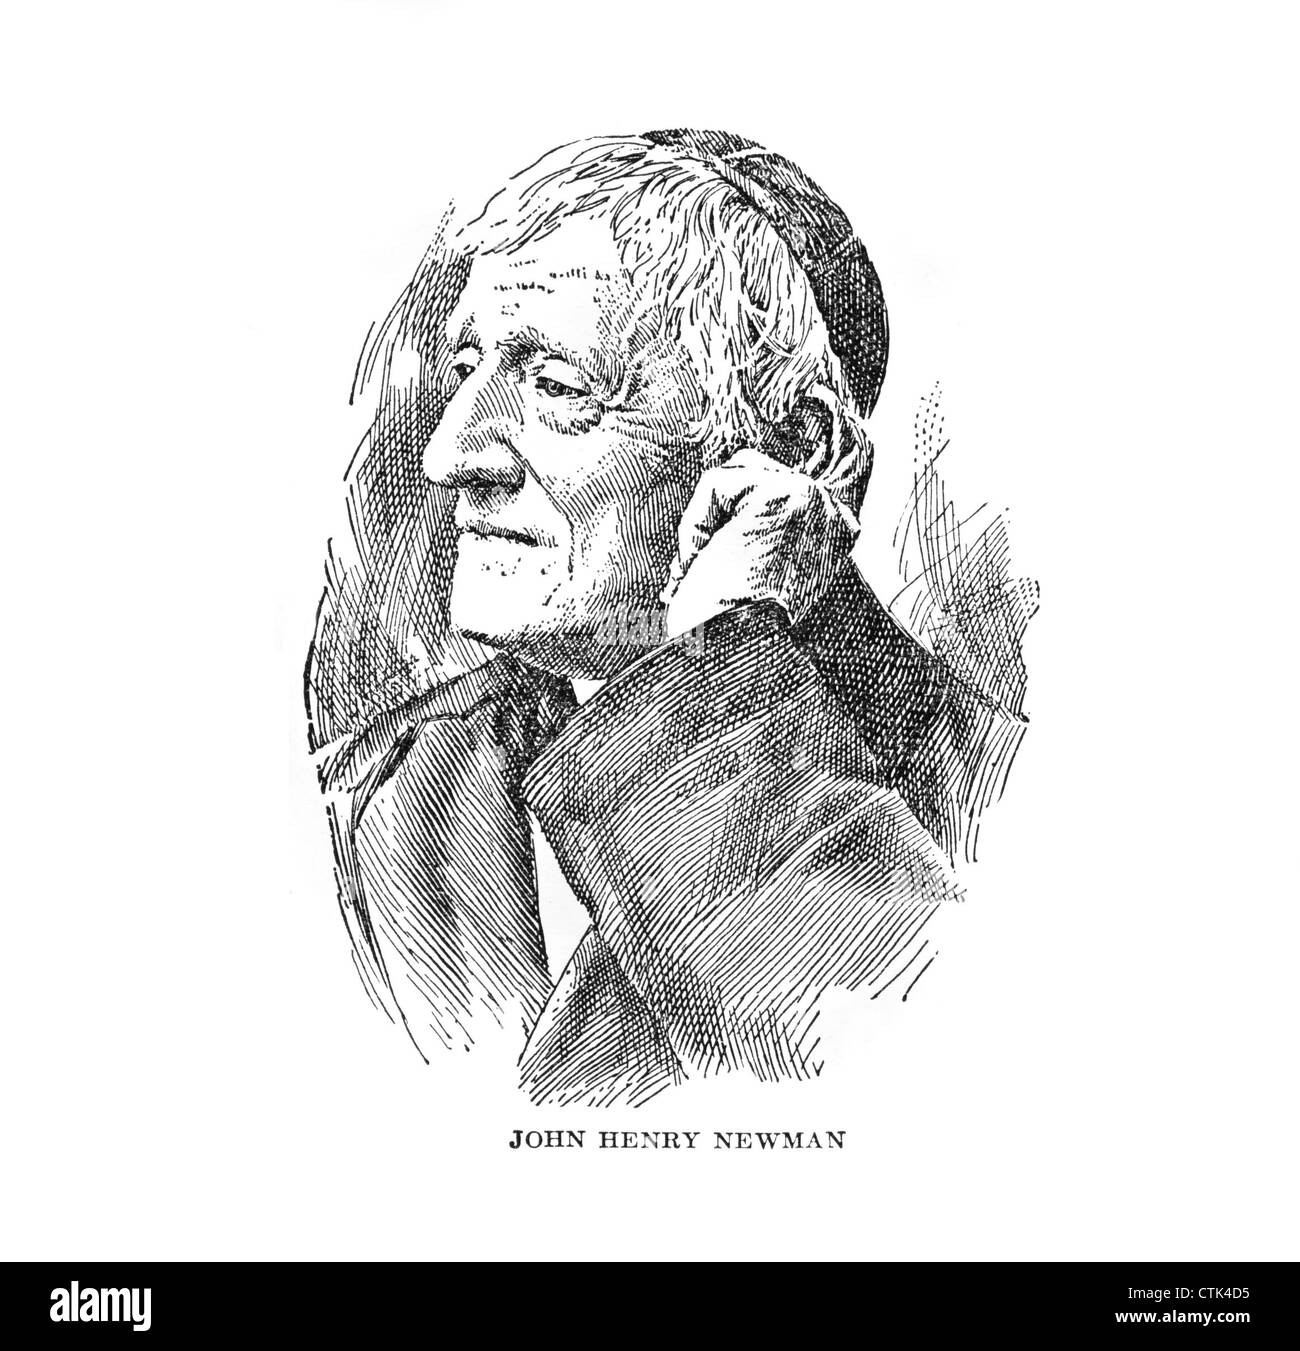 John Henry Newman, D.D., C.O., (21 February 1801 – 11 August 1890), also referred to as Cardinal Newman. Stock Photo